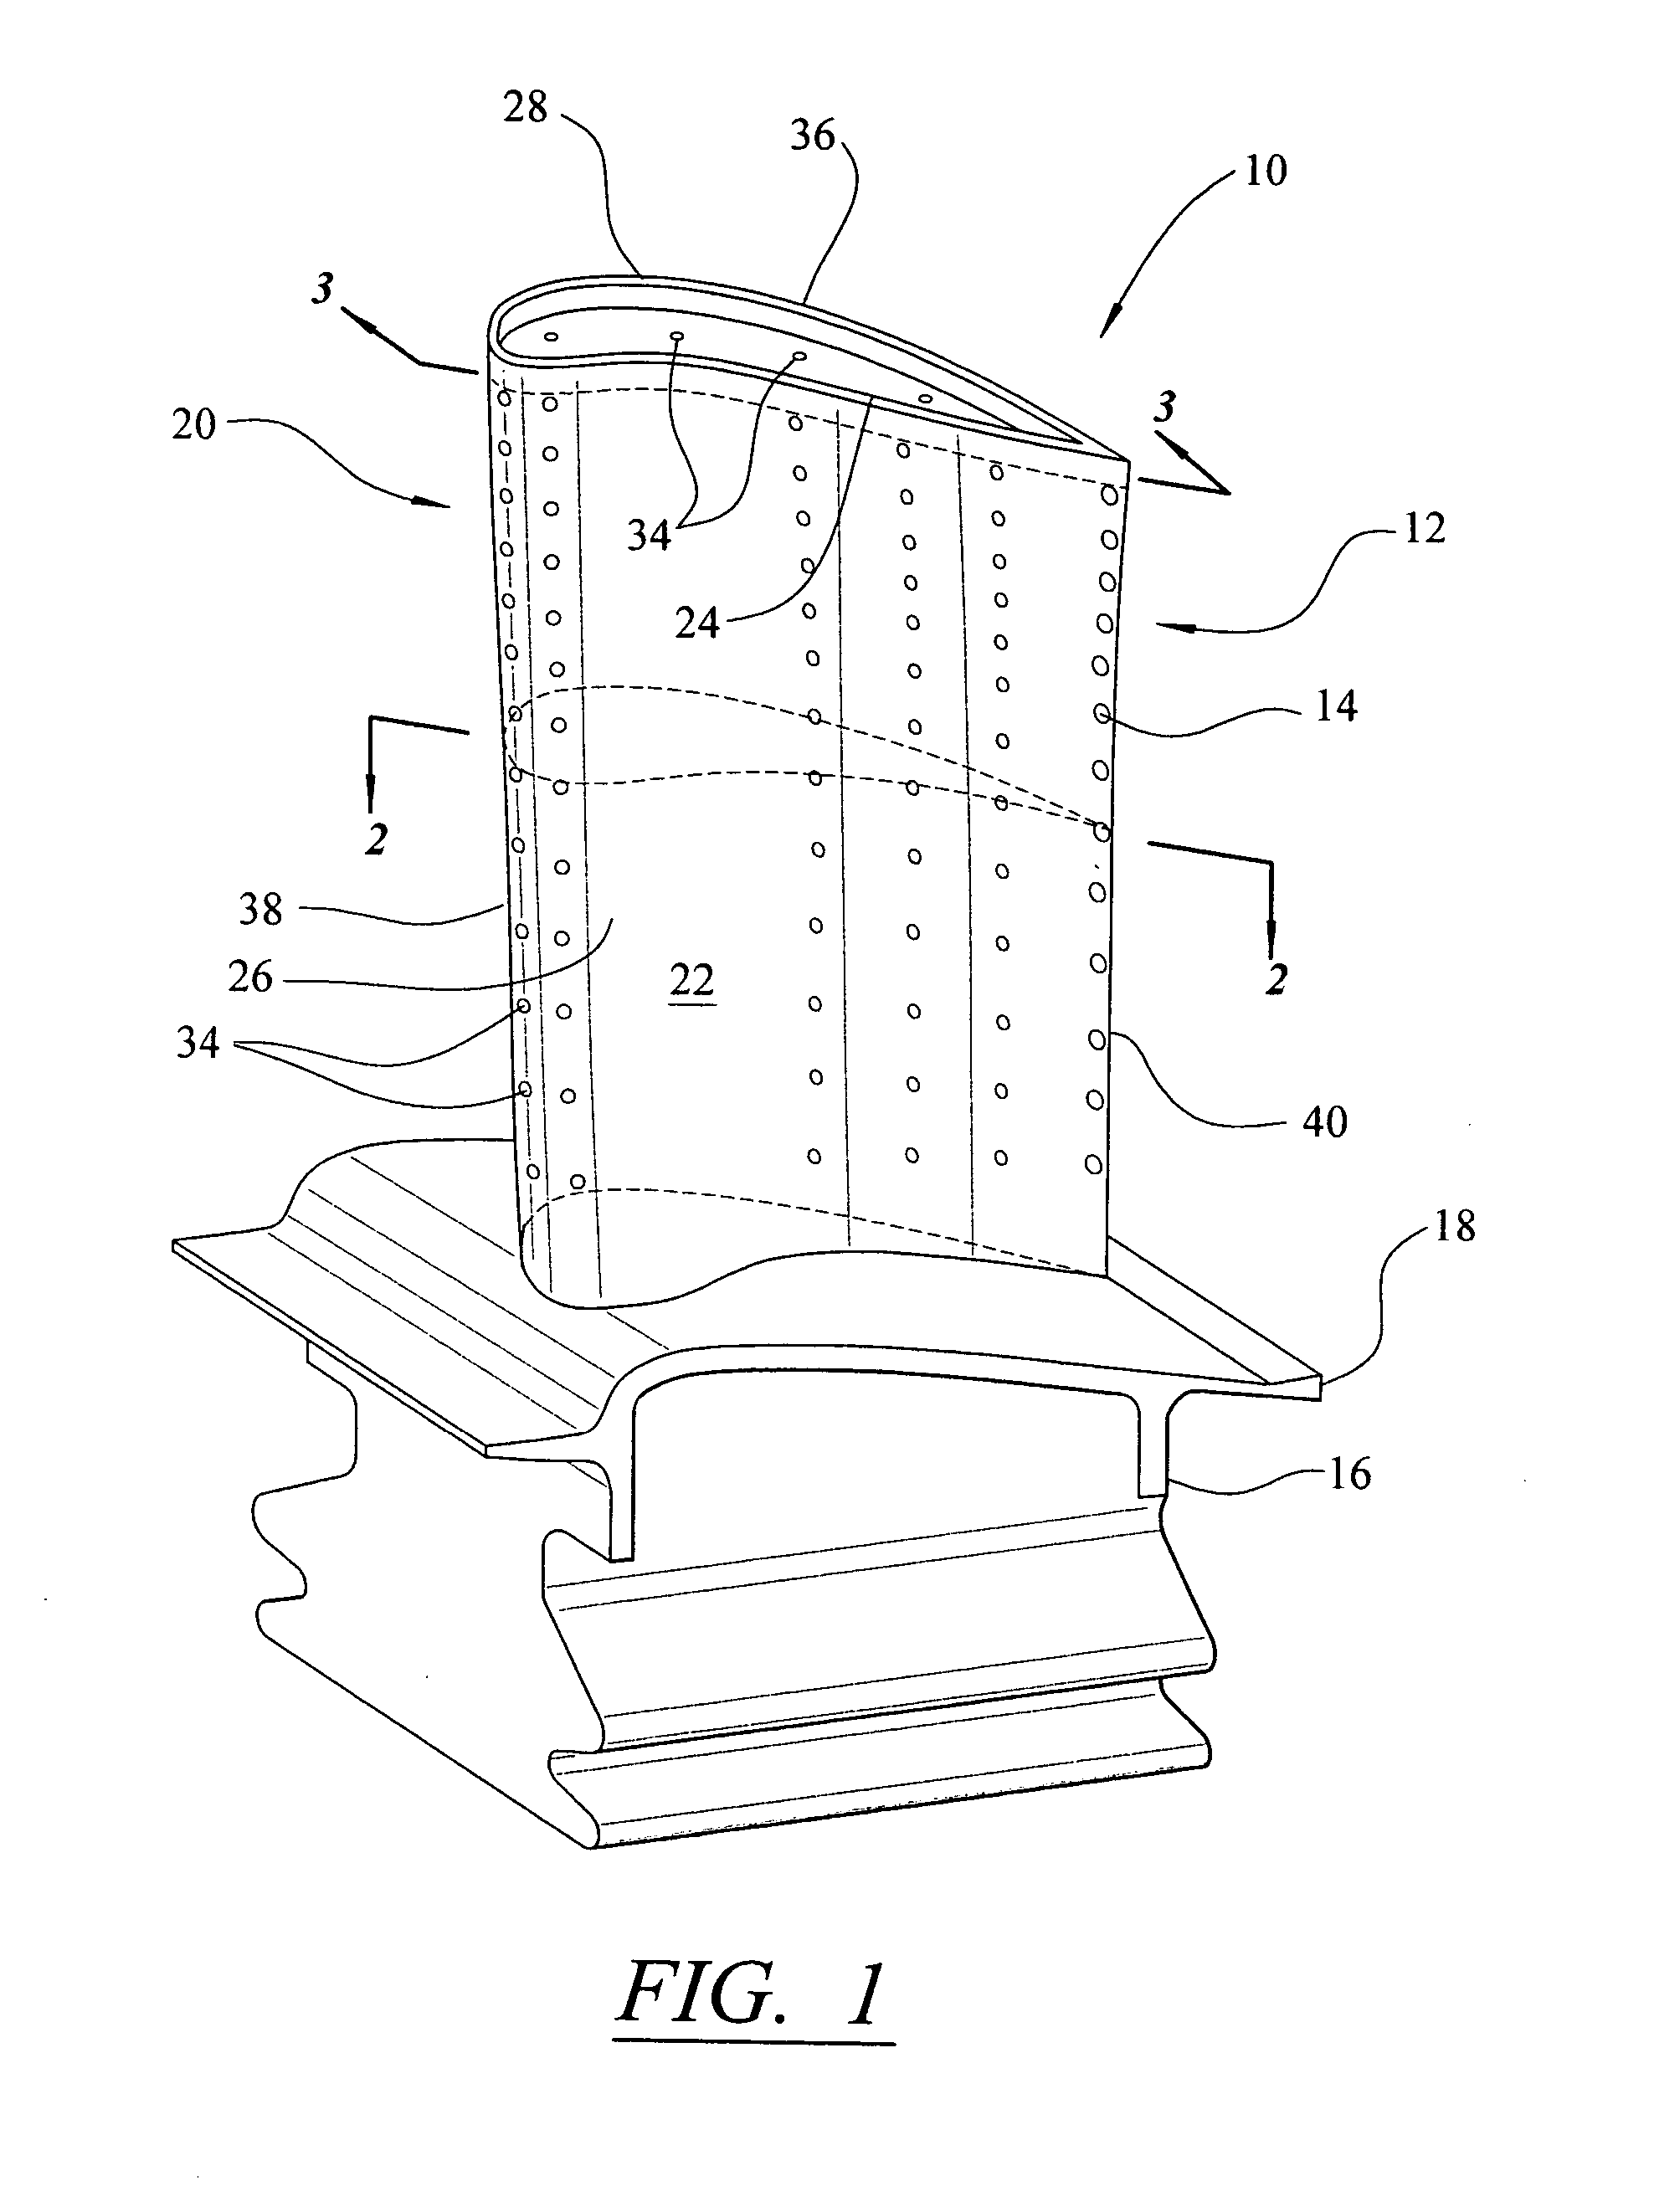 Cooling system for a turbine blade